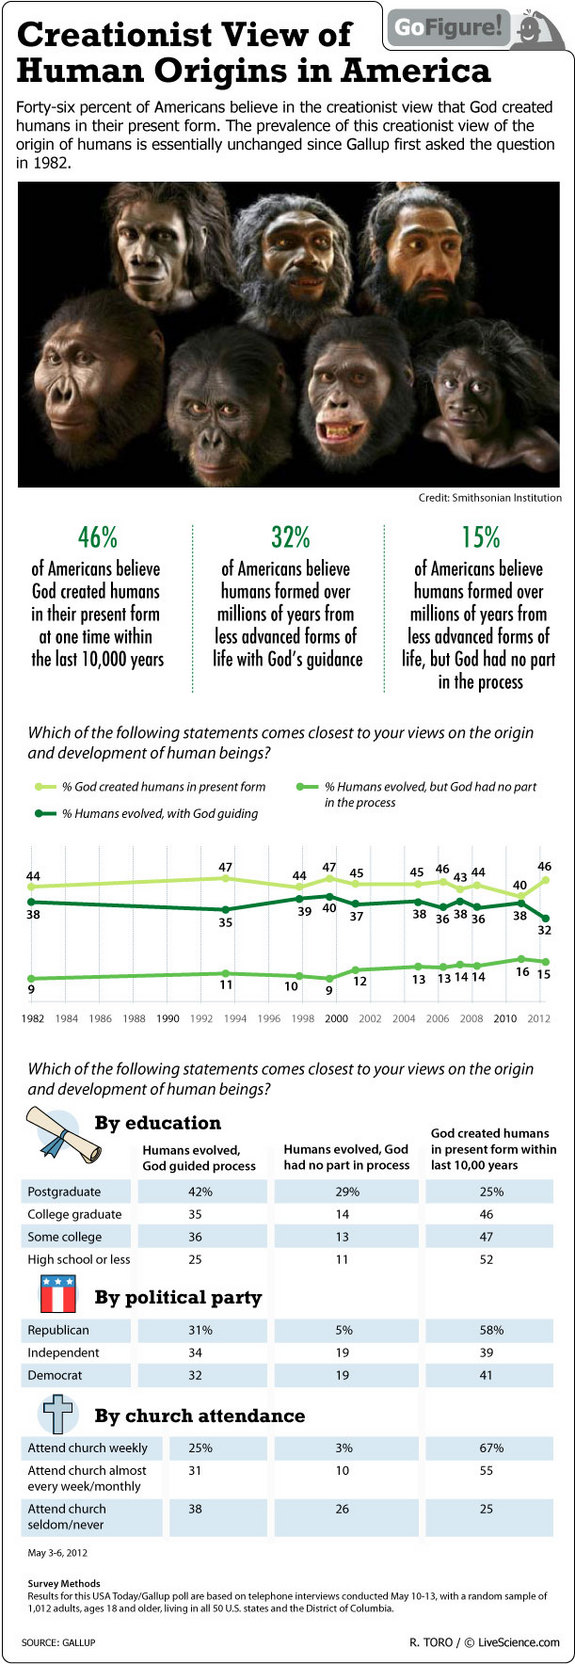 Creationism in the US